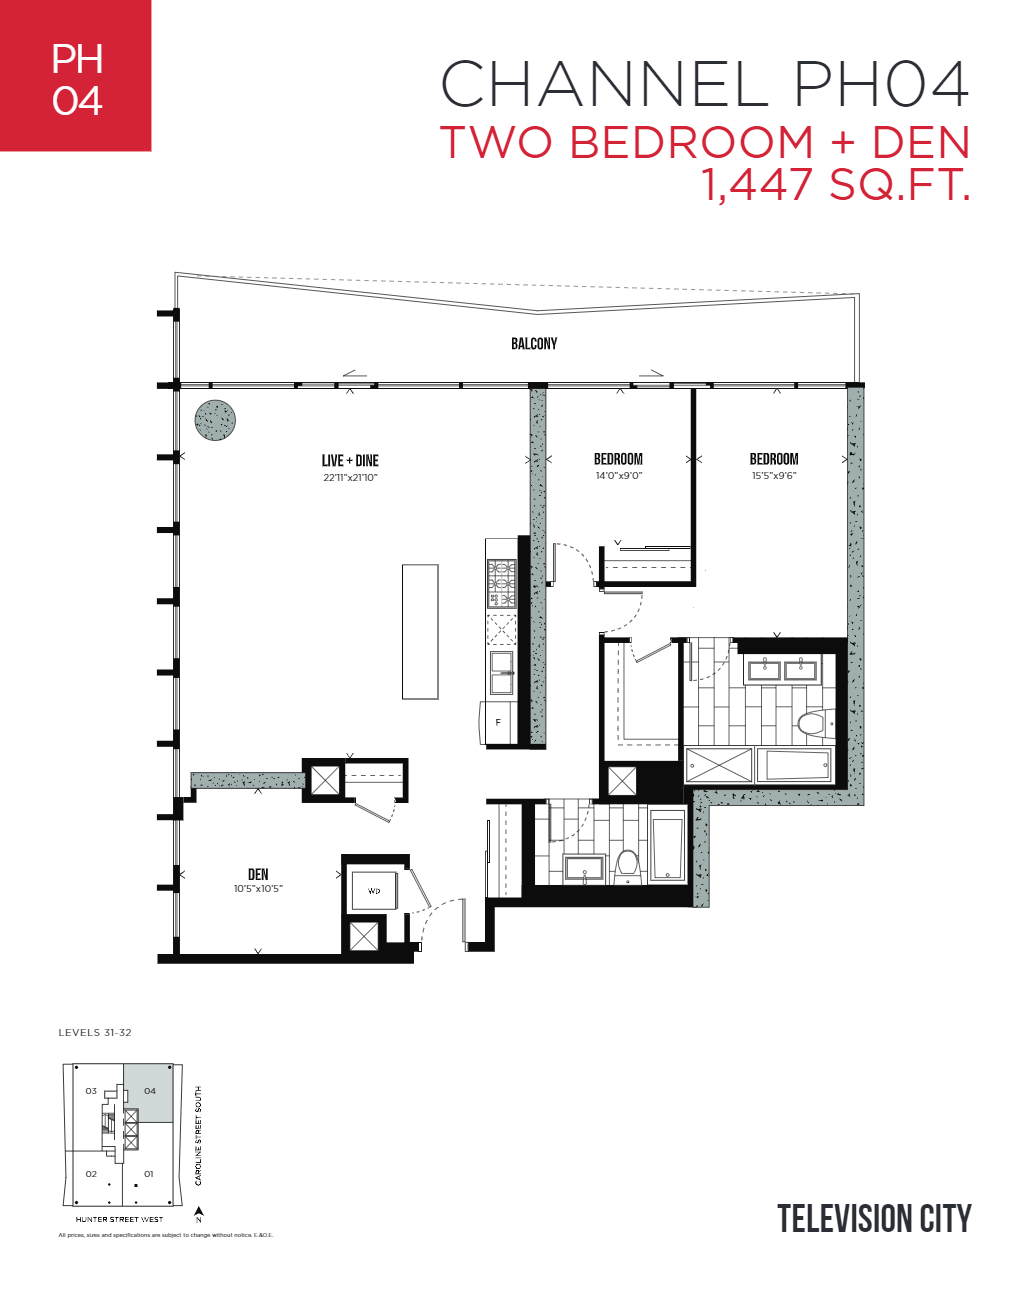  Floor Plan of Television City Condos with undefined beds